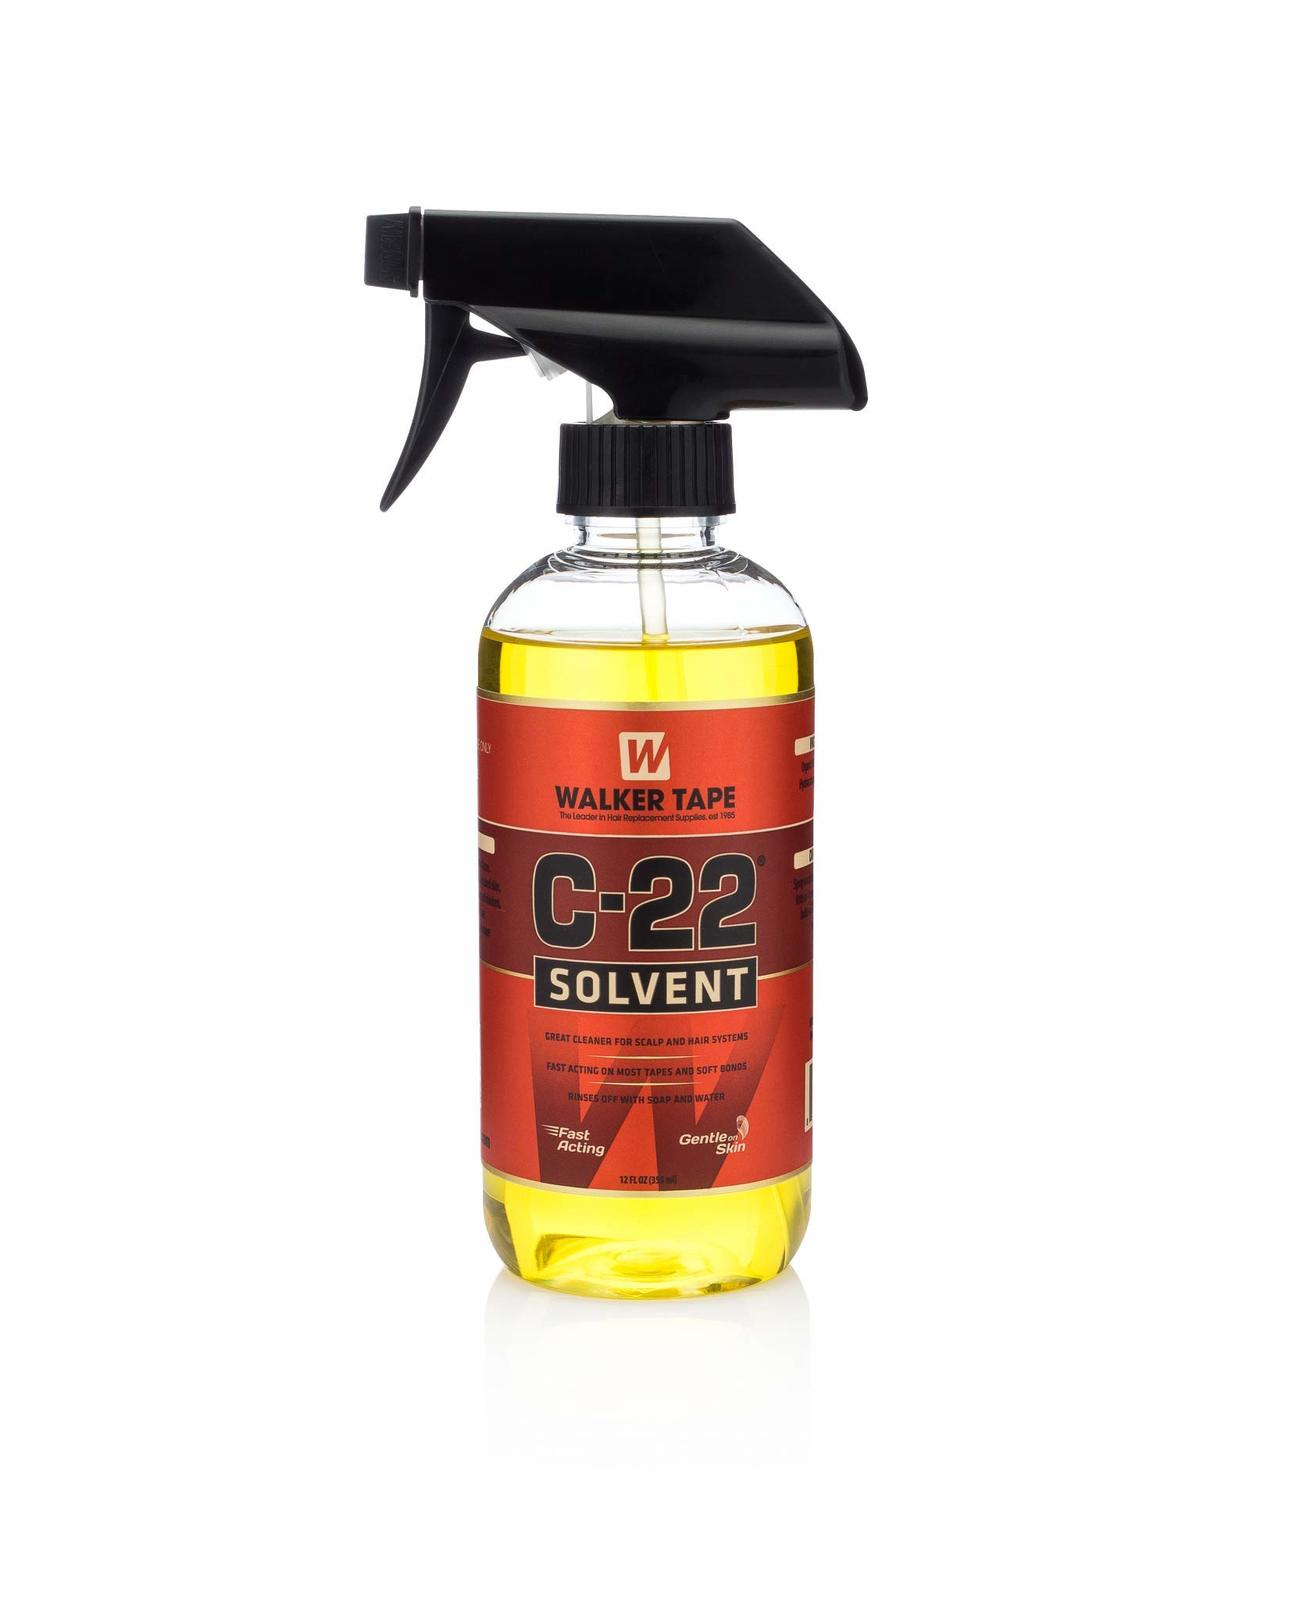 C-22 Adhesive Solvent 12.0 oz Spray by Walker - $27.97